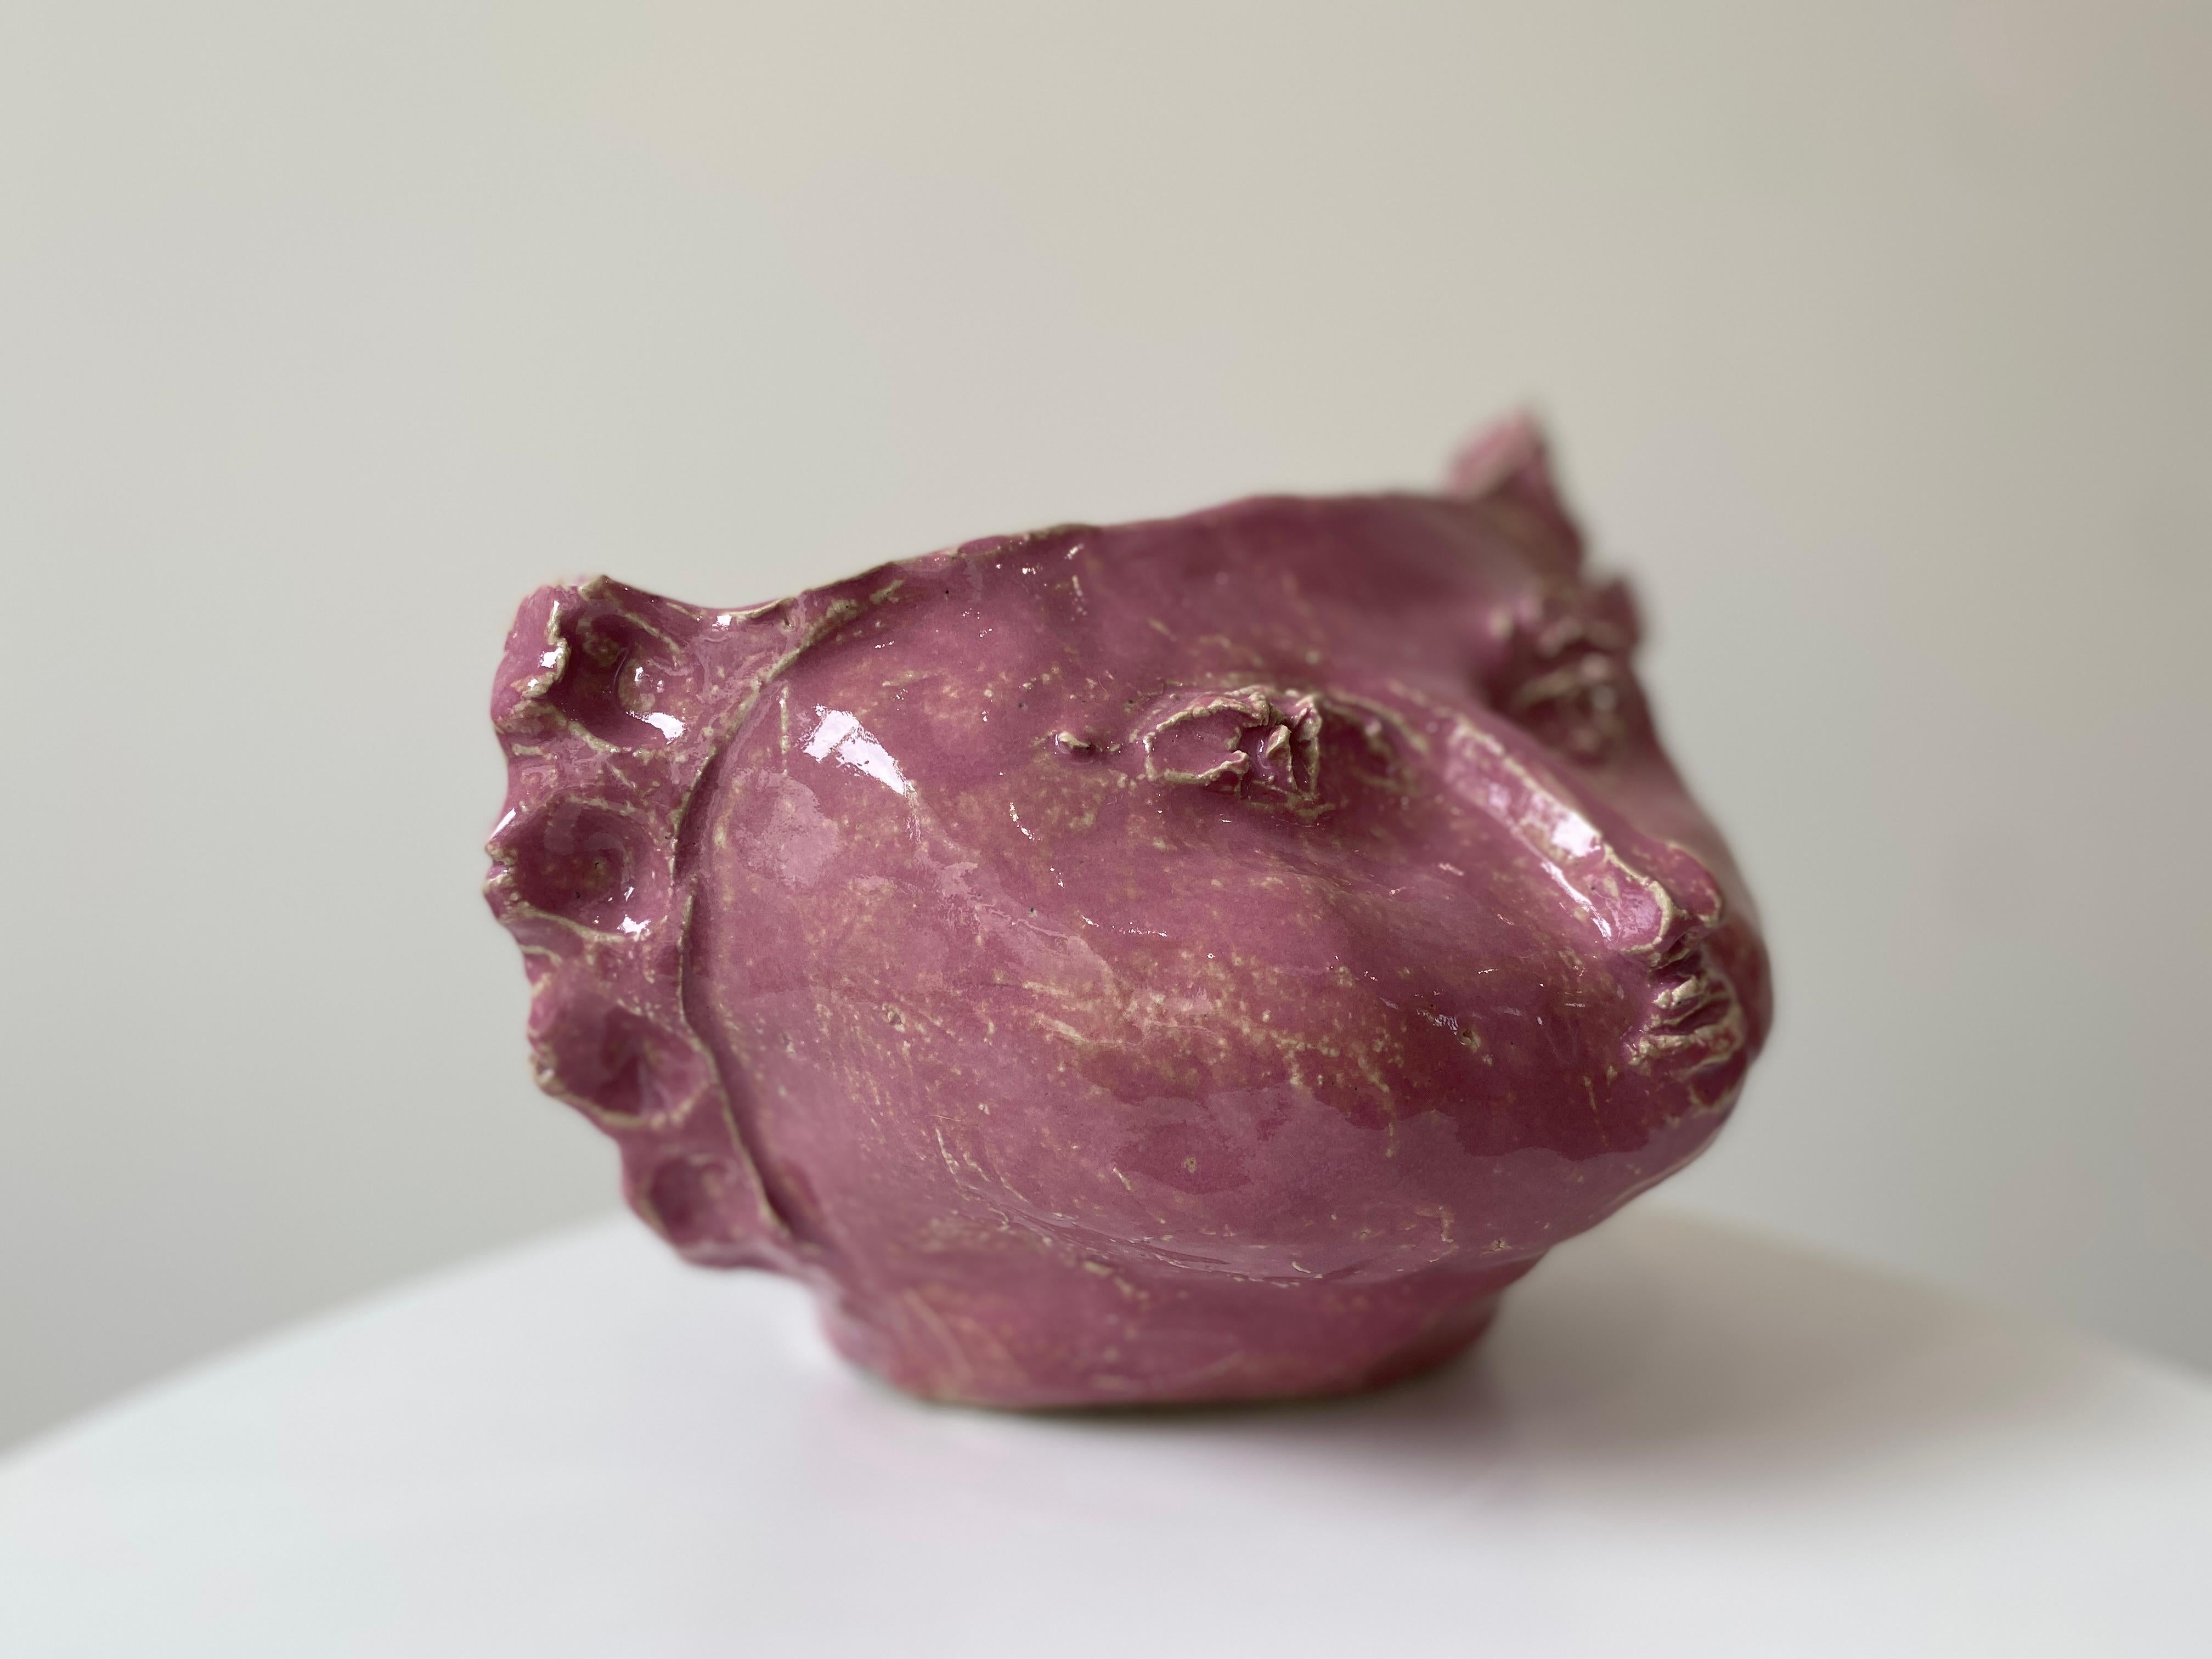 Pink sweet girl rustic wabi sabi hand sculpted glazed clay head face vessel vase For Sale 11